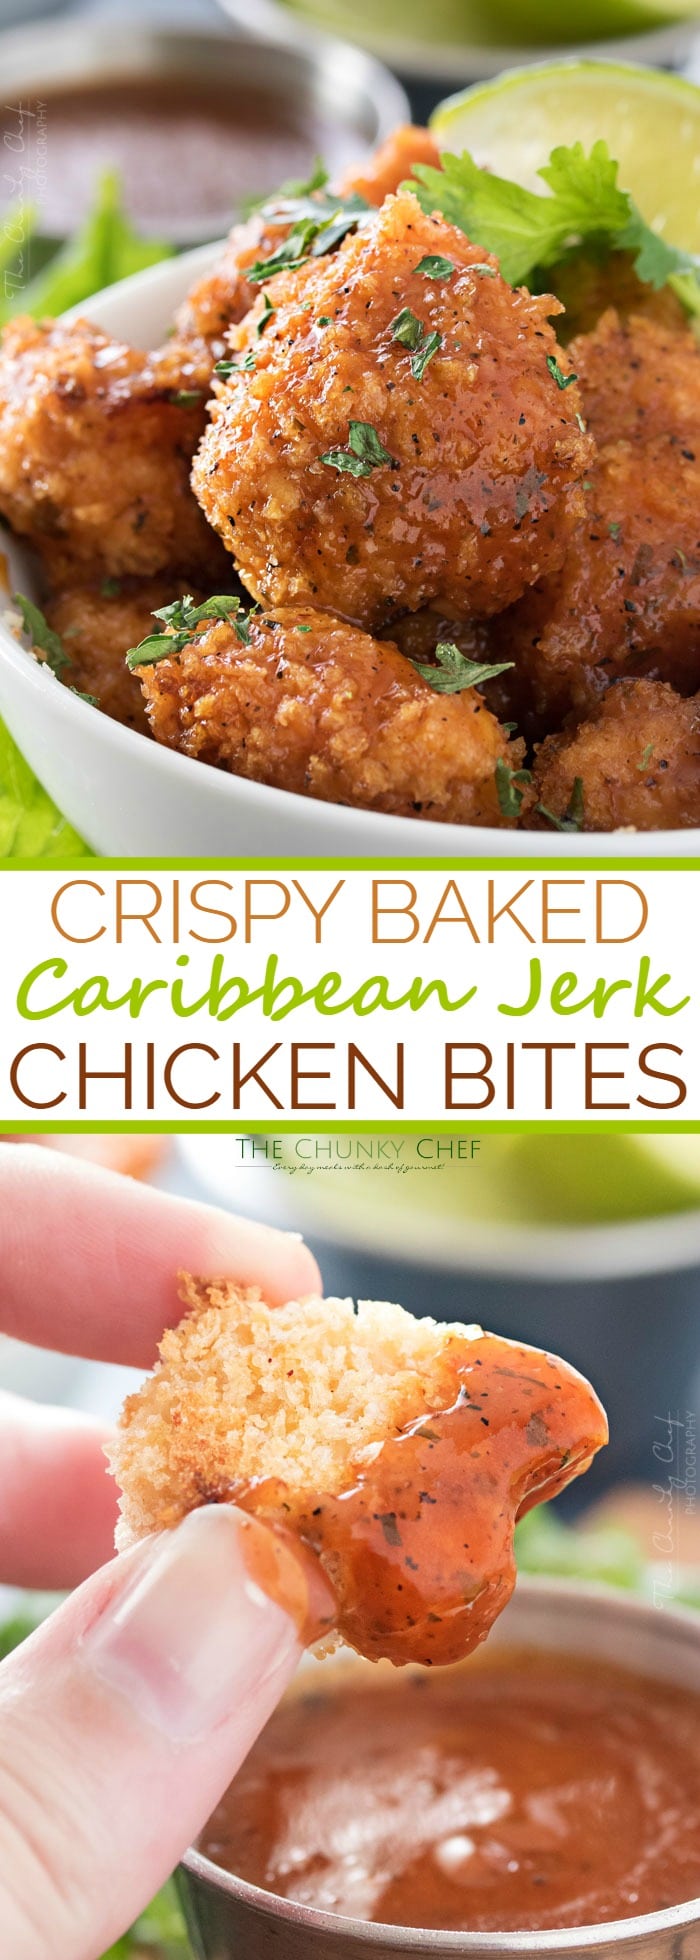 Baked Caribbean Jerk Chicken Bites | These ultra crispy chicken bites are lightened up by baking instead of frying in oil, then tossed in a mouthwatering copycat Caribbean Jerk sauce! | http://thechunkychef.com